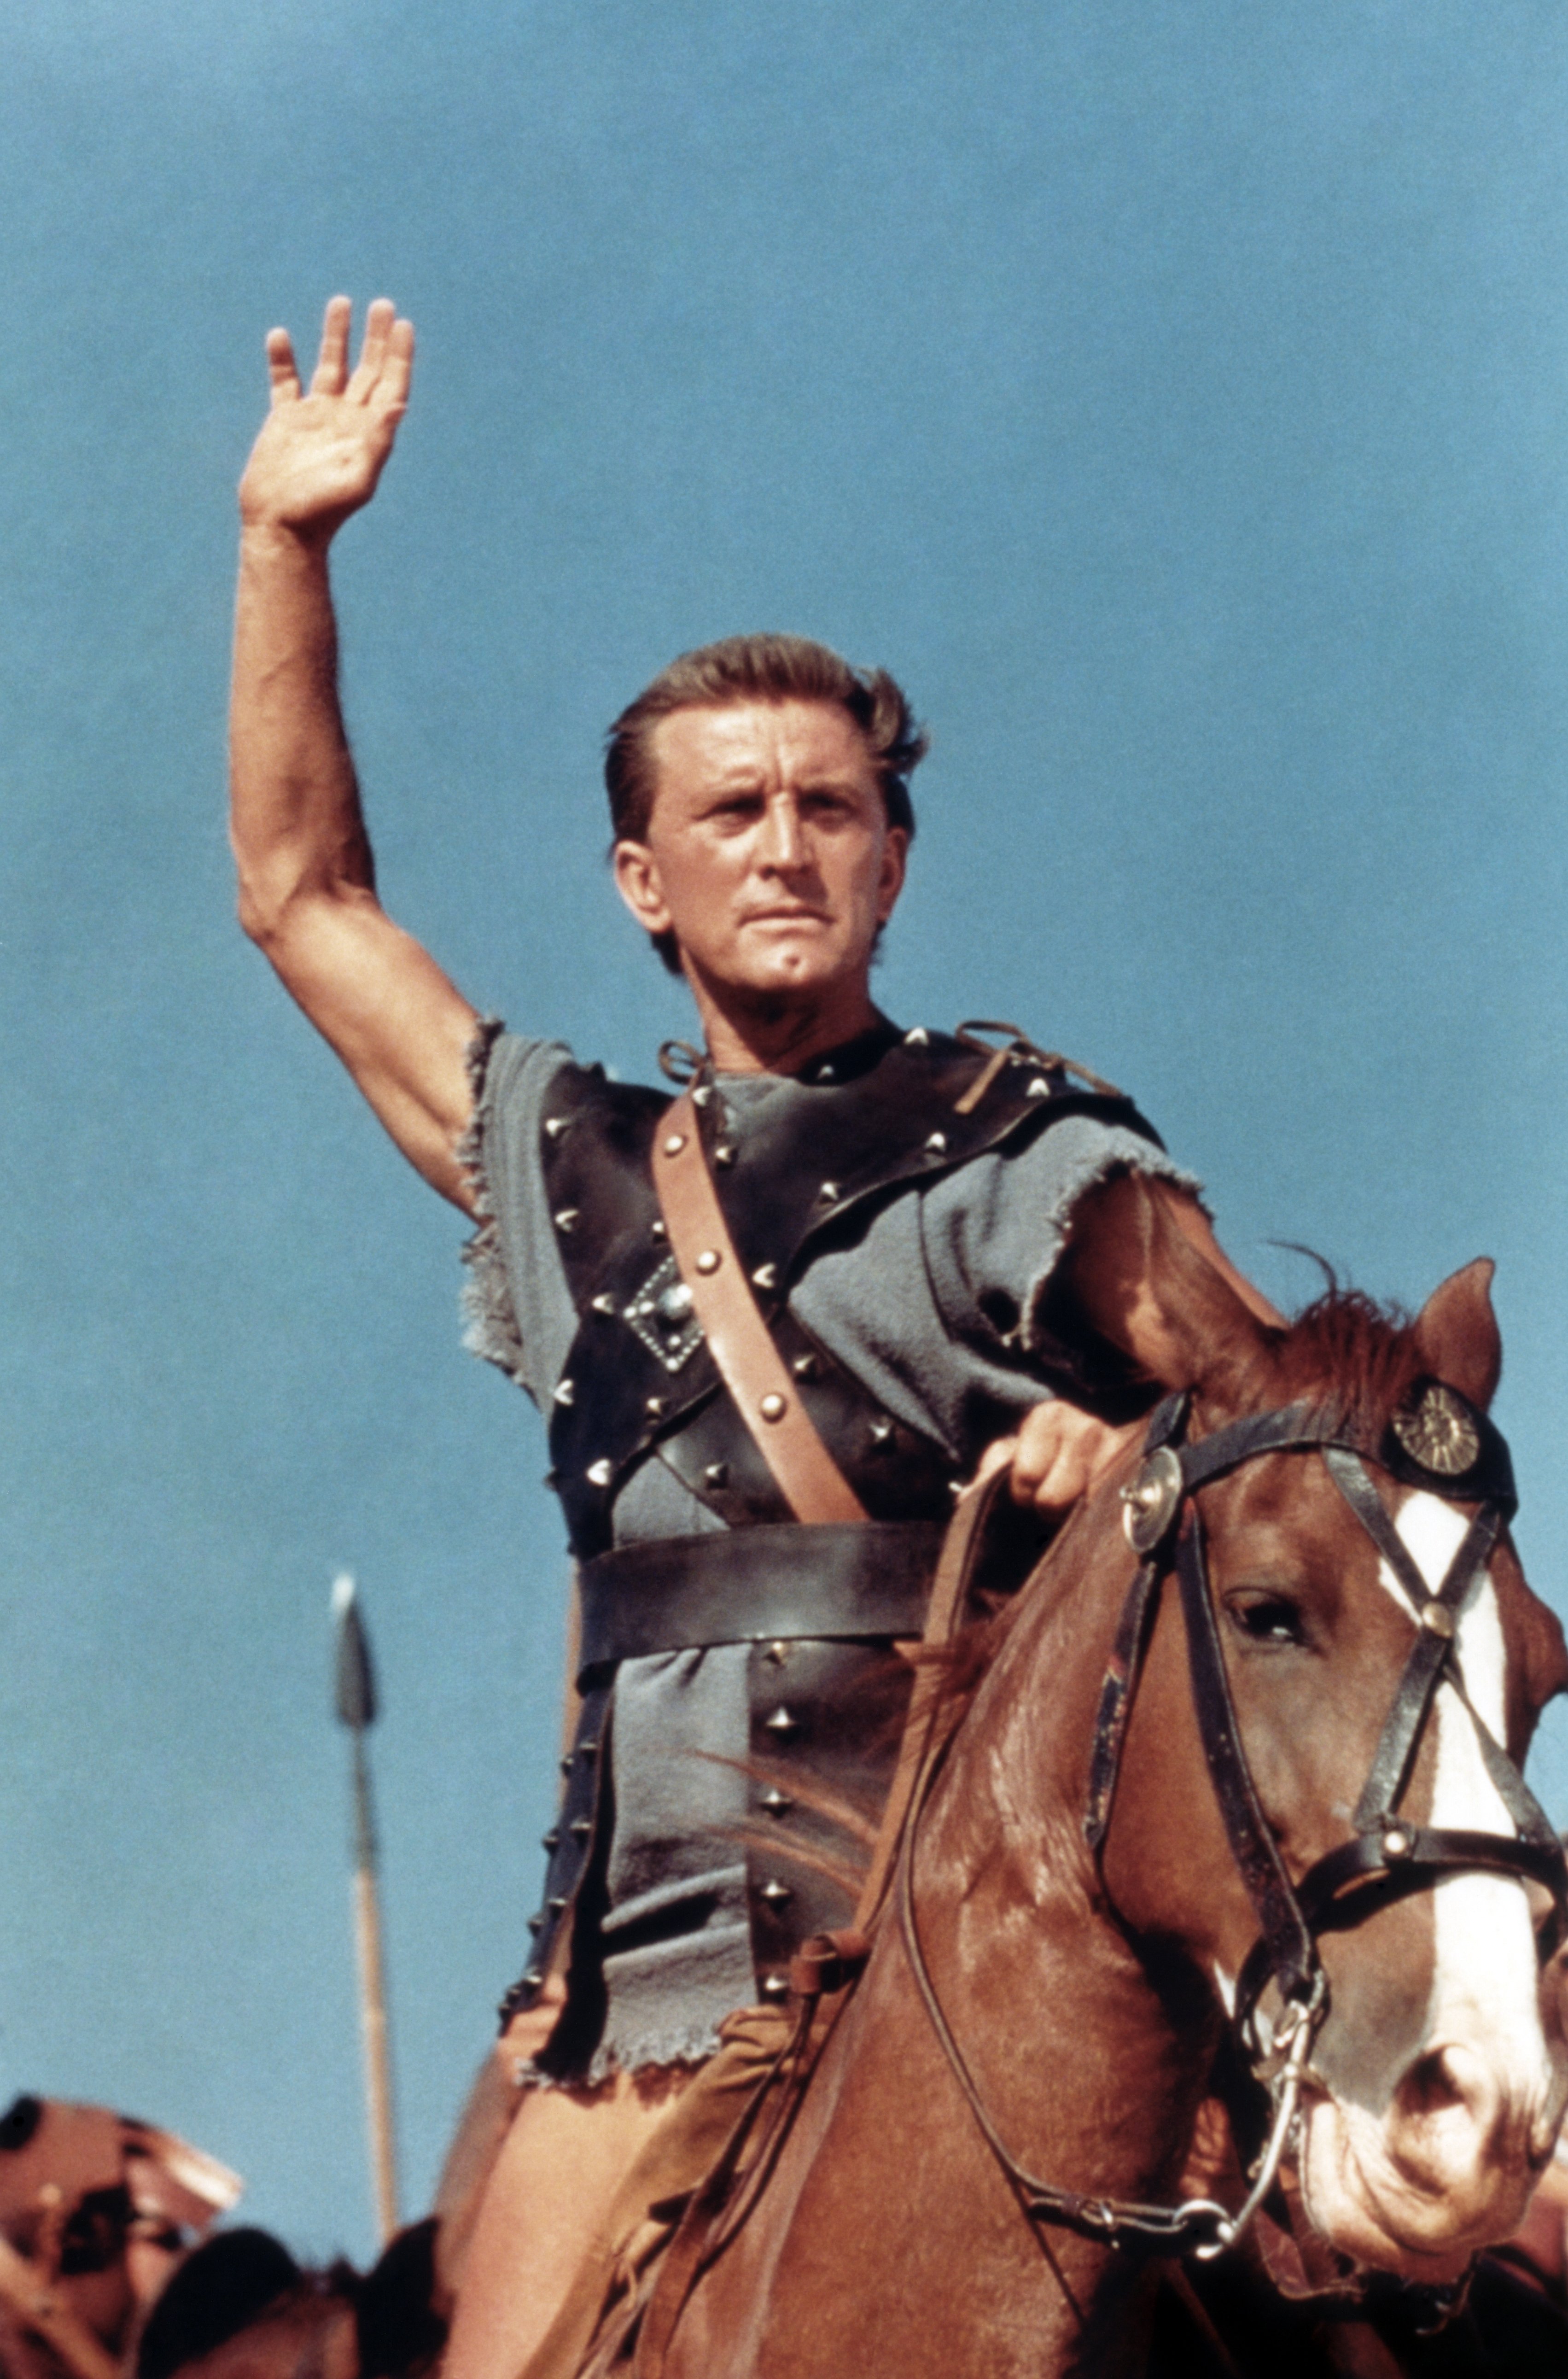 Kirk Douglas in the 1960 action film "Spartacus" pictured on top of a horse with his hand raised in the air. | Source: Getty Images